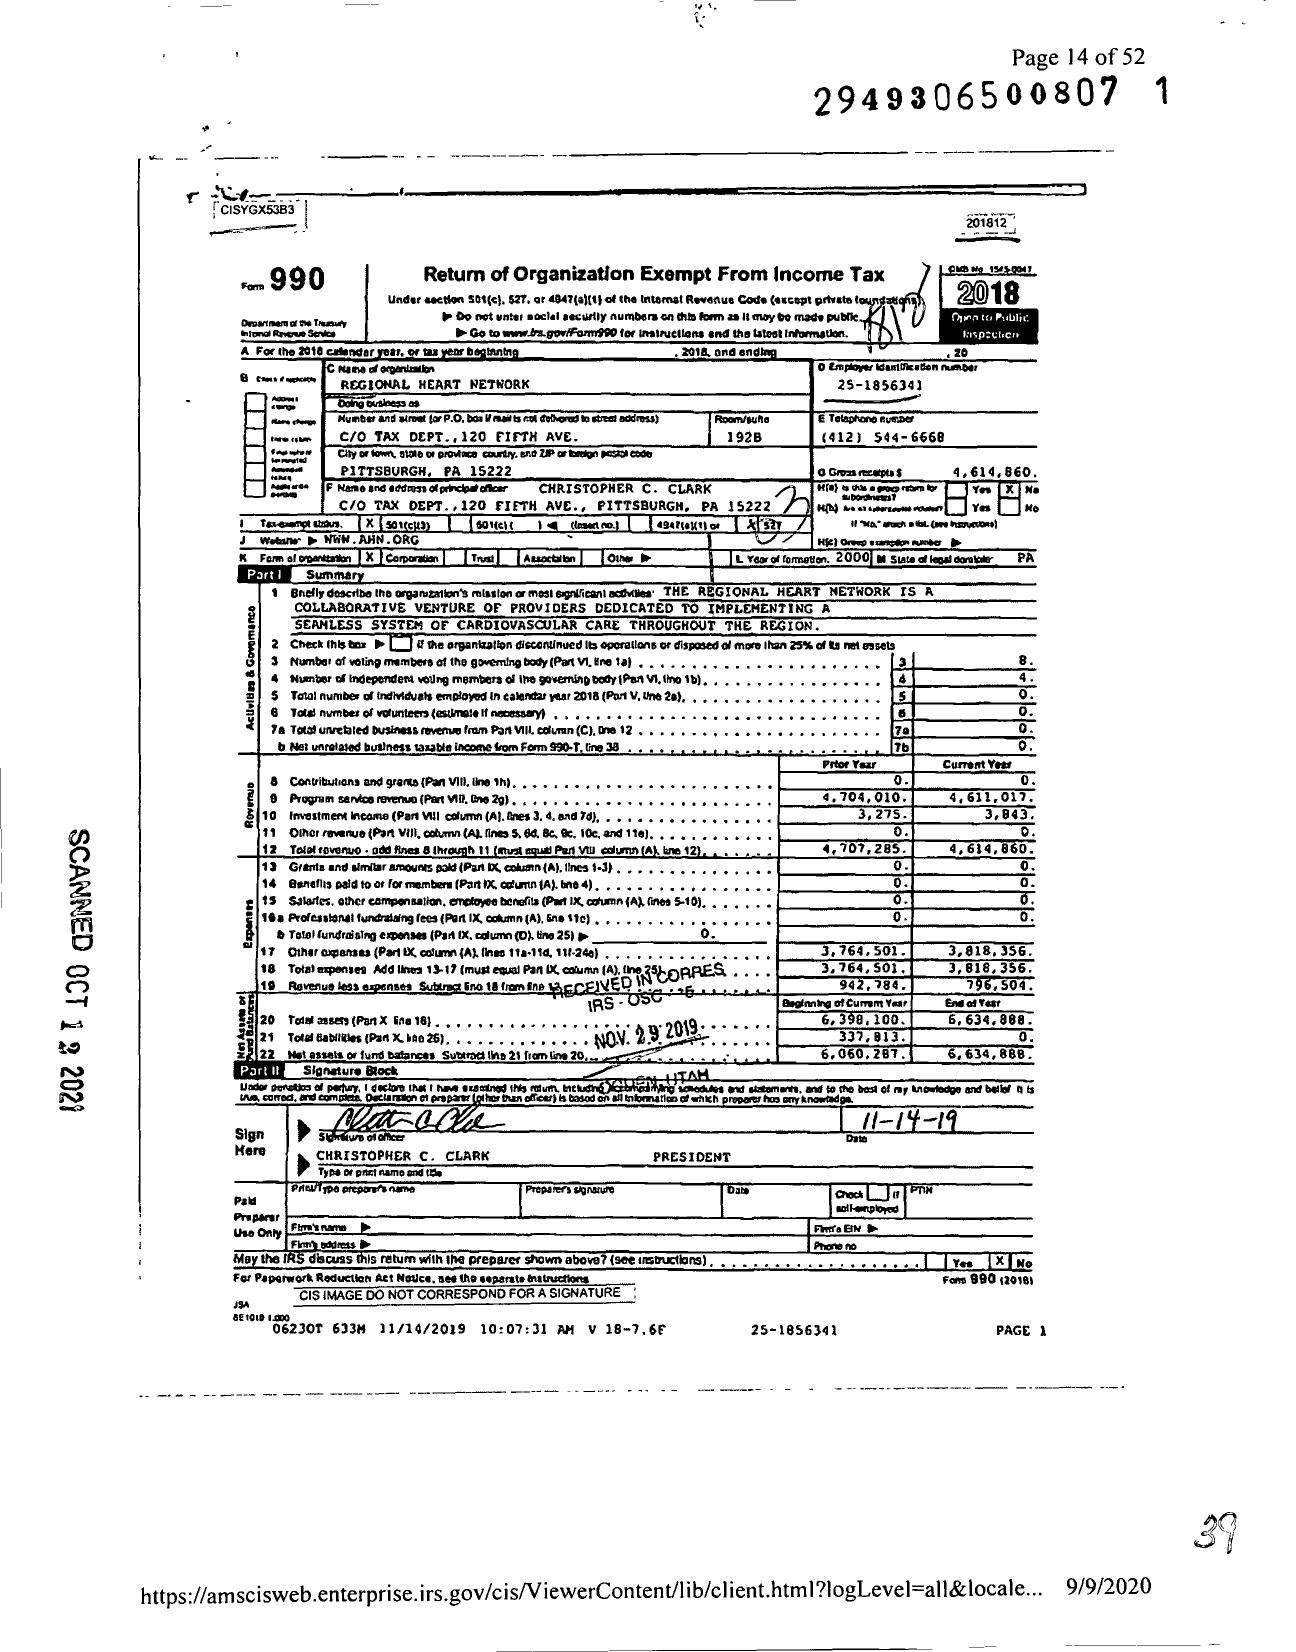 Image of first page of 2018 Form 990 for Regional Heart Network